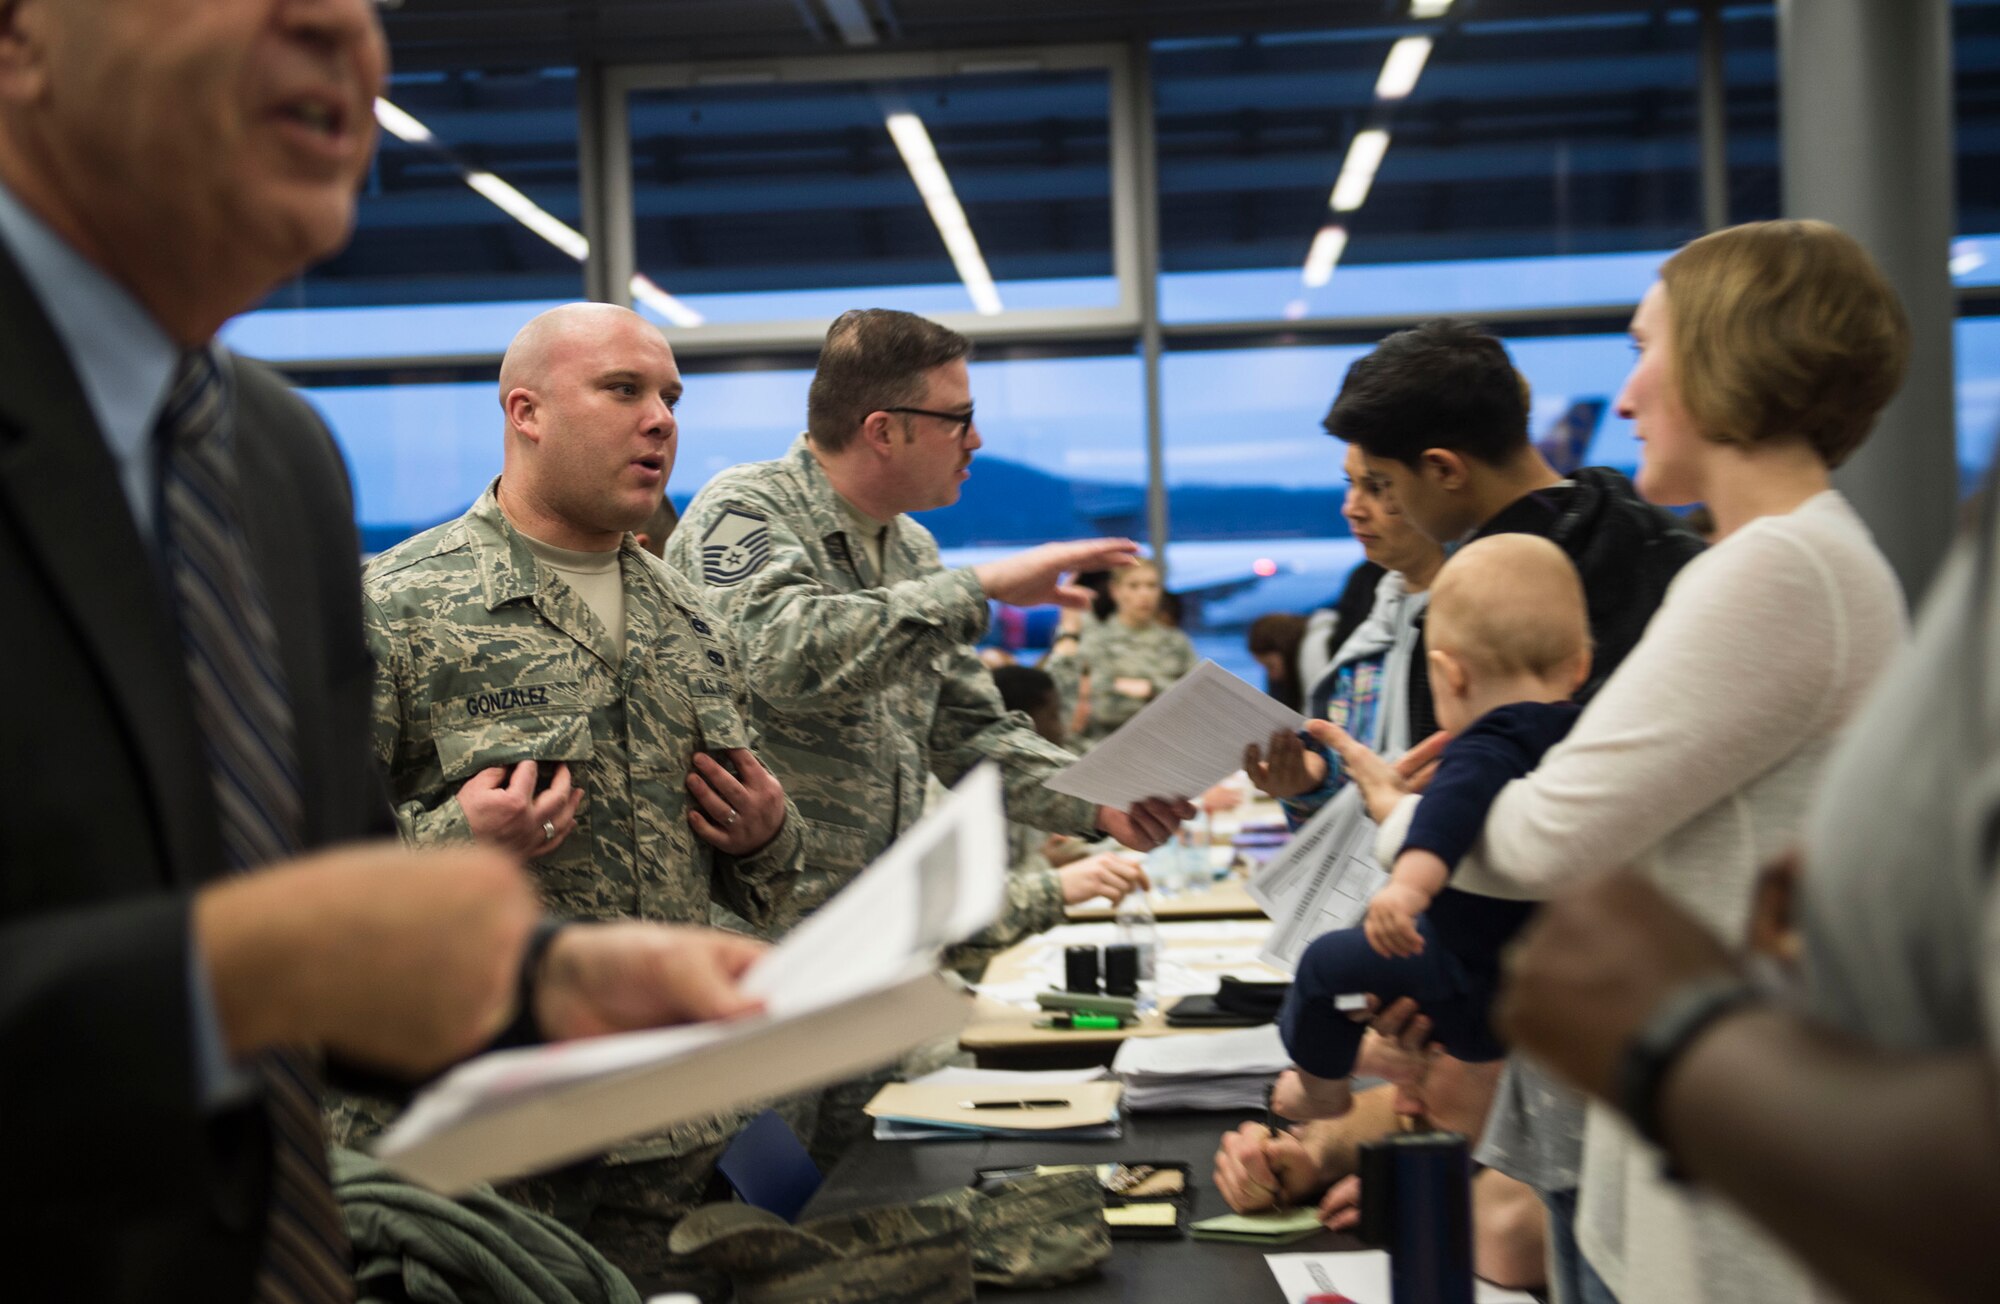 Airmen from the 86th Airlift Wing process families into Ramstein Air Base, Germany after their departure from Turkey March 30, 2016. Because of the ongoing threat in the region, dependents of service members were ordered to leave Turkey and temporarily relocated to Ramstein by the Department of Defense. (U.S. Air Force photo/Staff Sgt. Sara Keller)